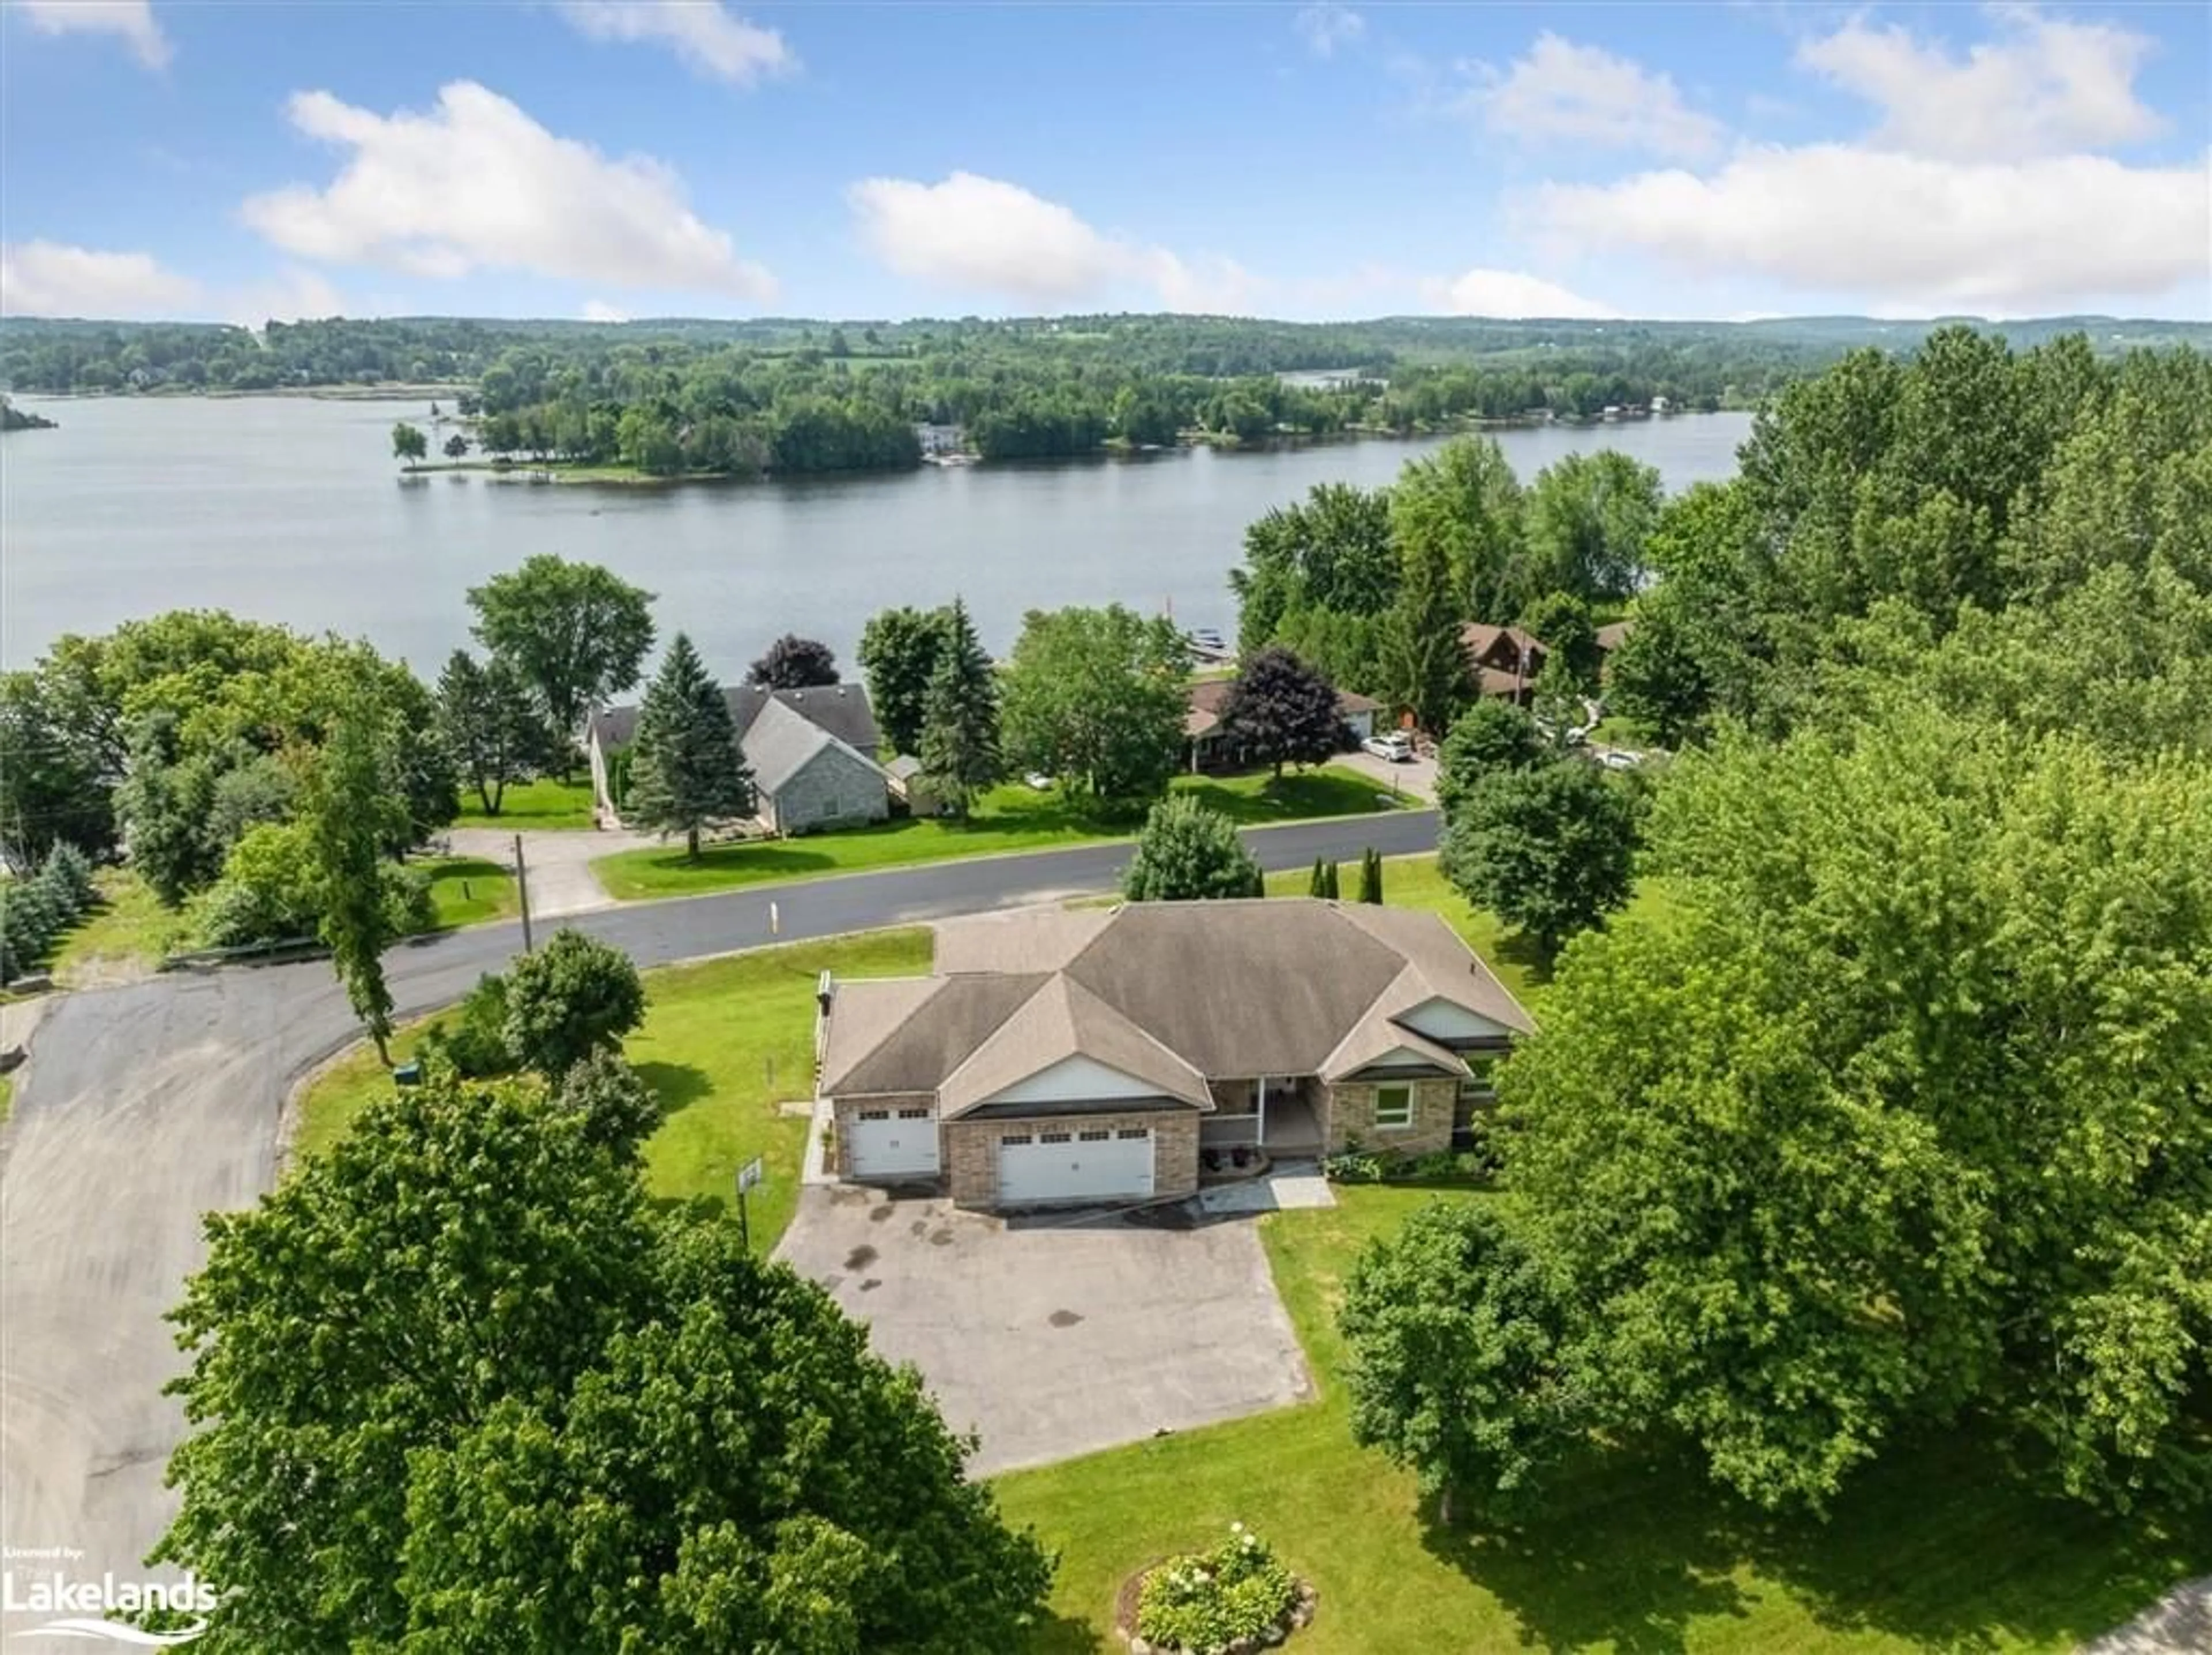 Lakeview for 20 Scenic Hill Rd, Omemee Ontario K0L 2W0